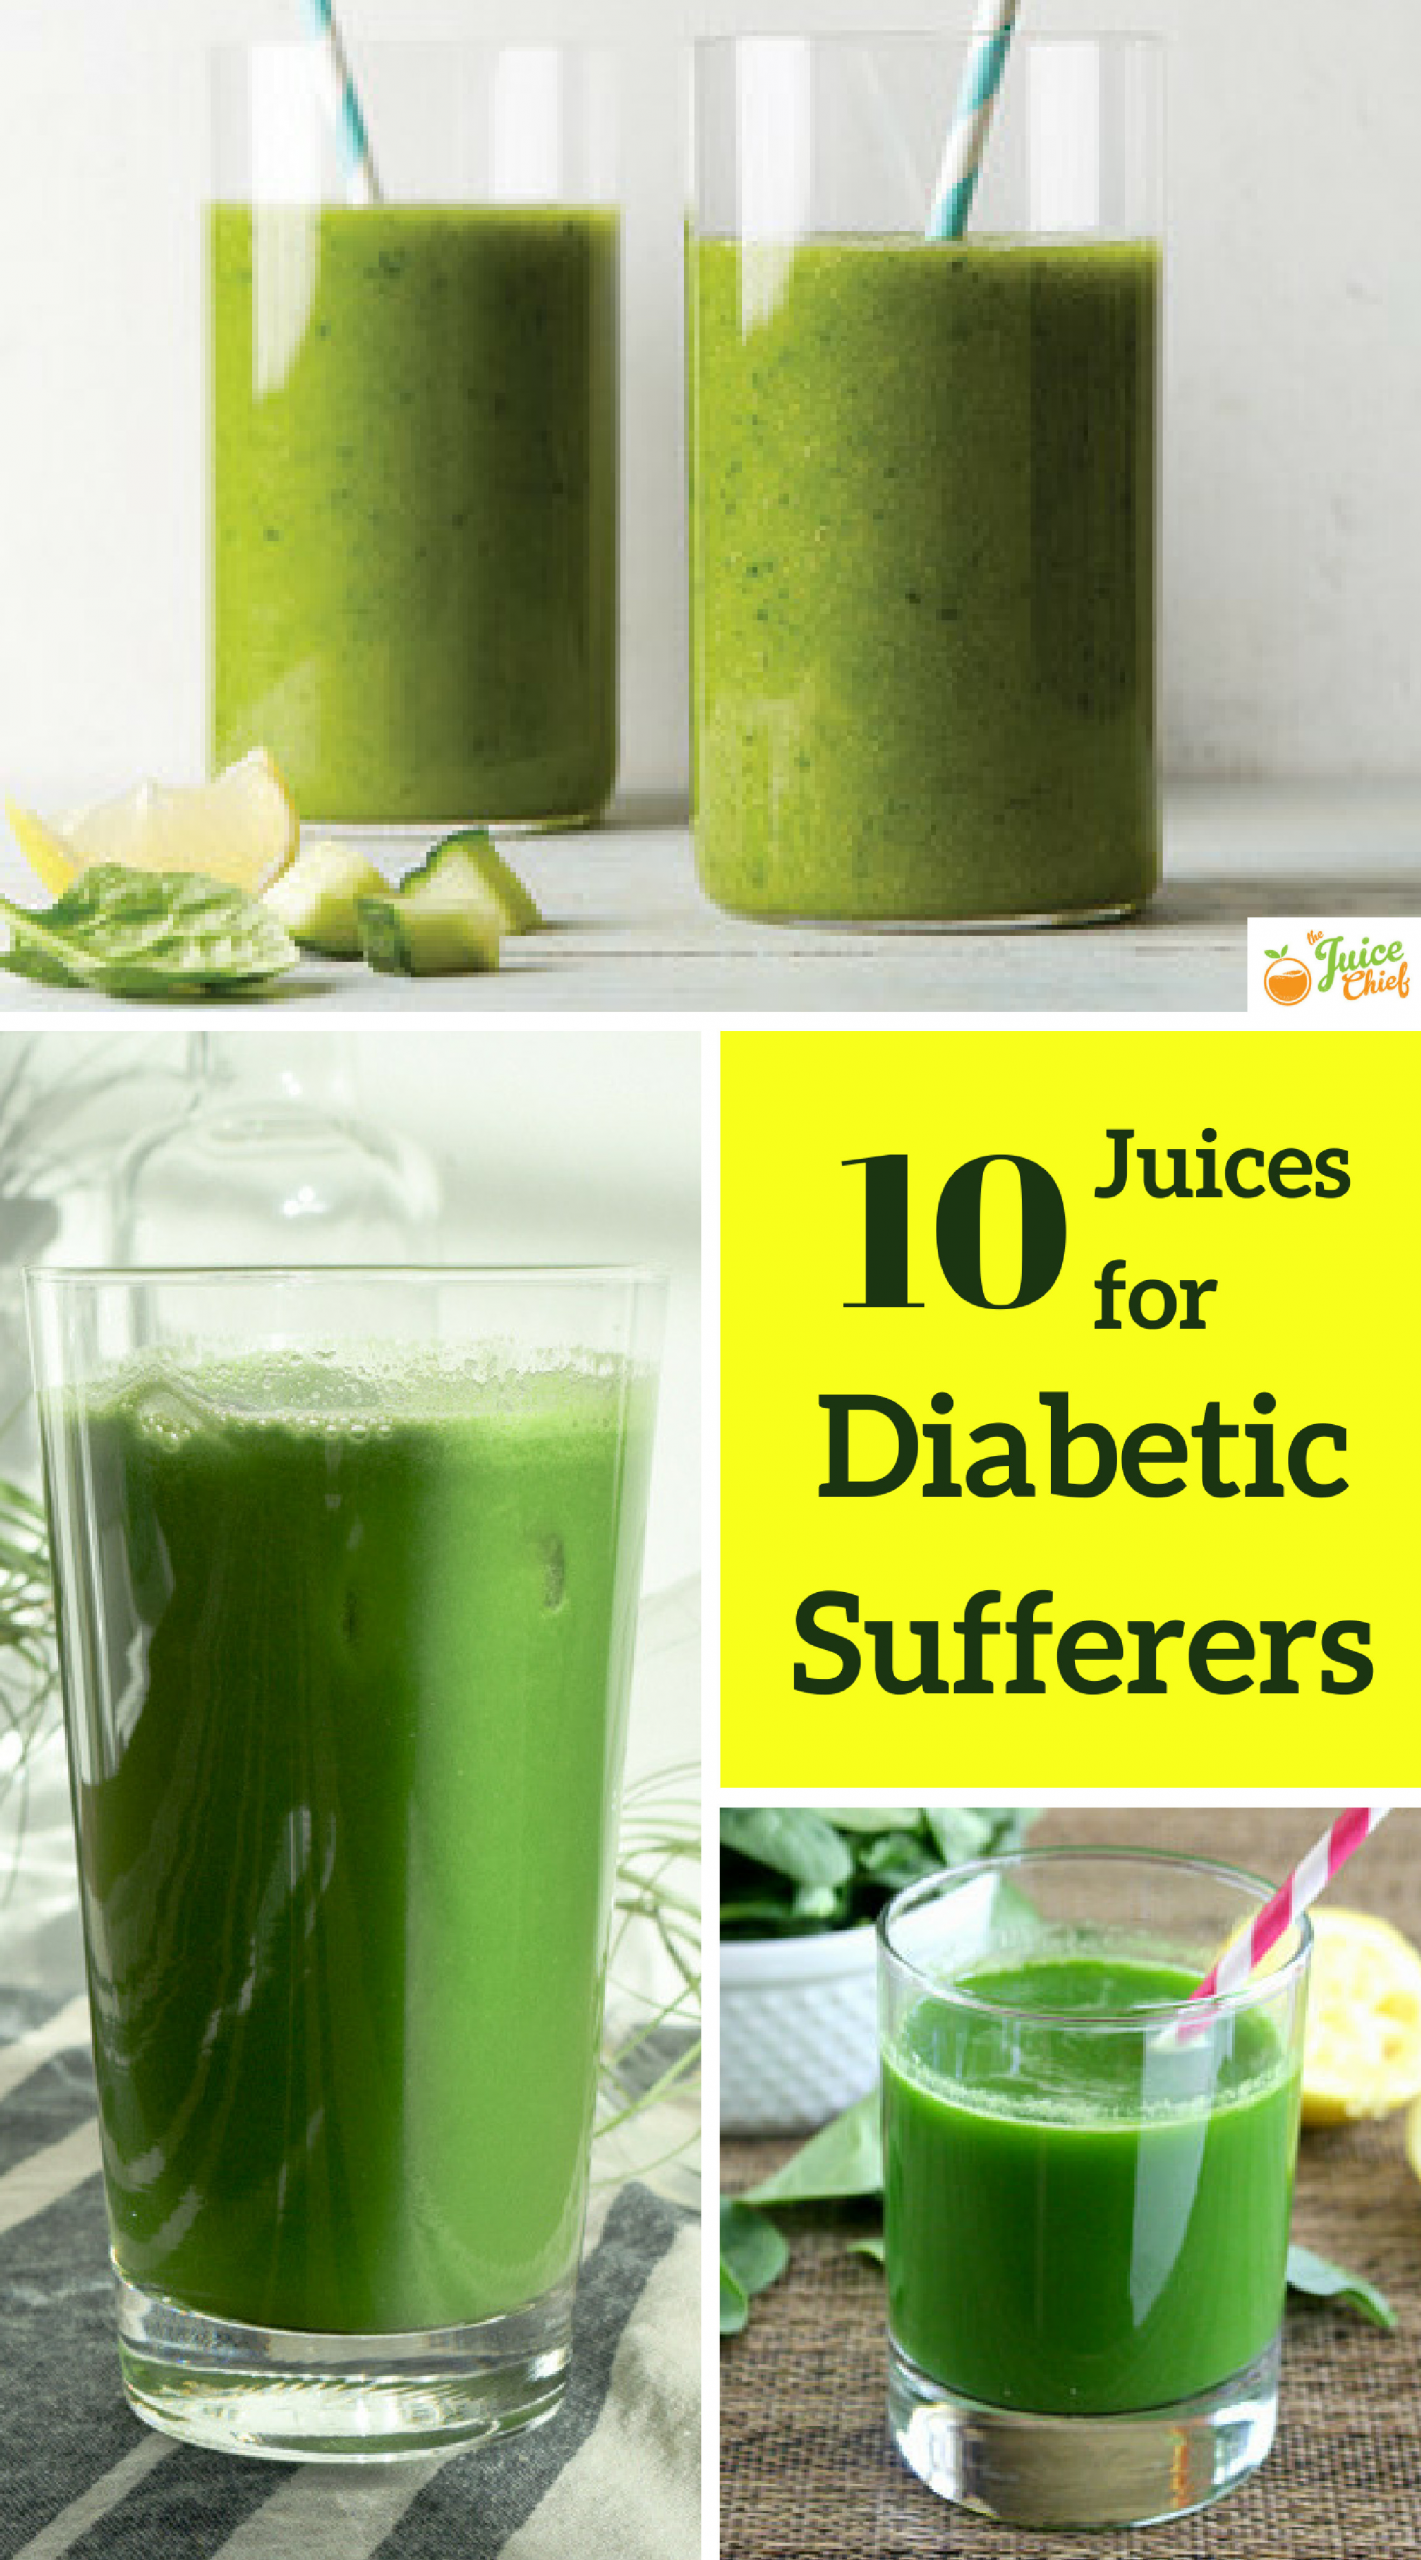 Are Smoothies Good For Diabetics
 The 10 best JuiceRecipes for Diabetic Sufferers Get the